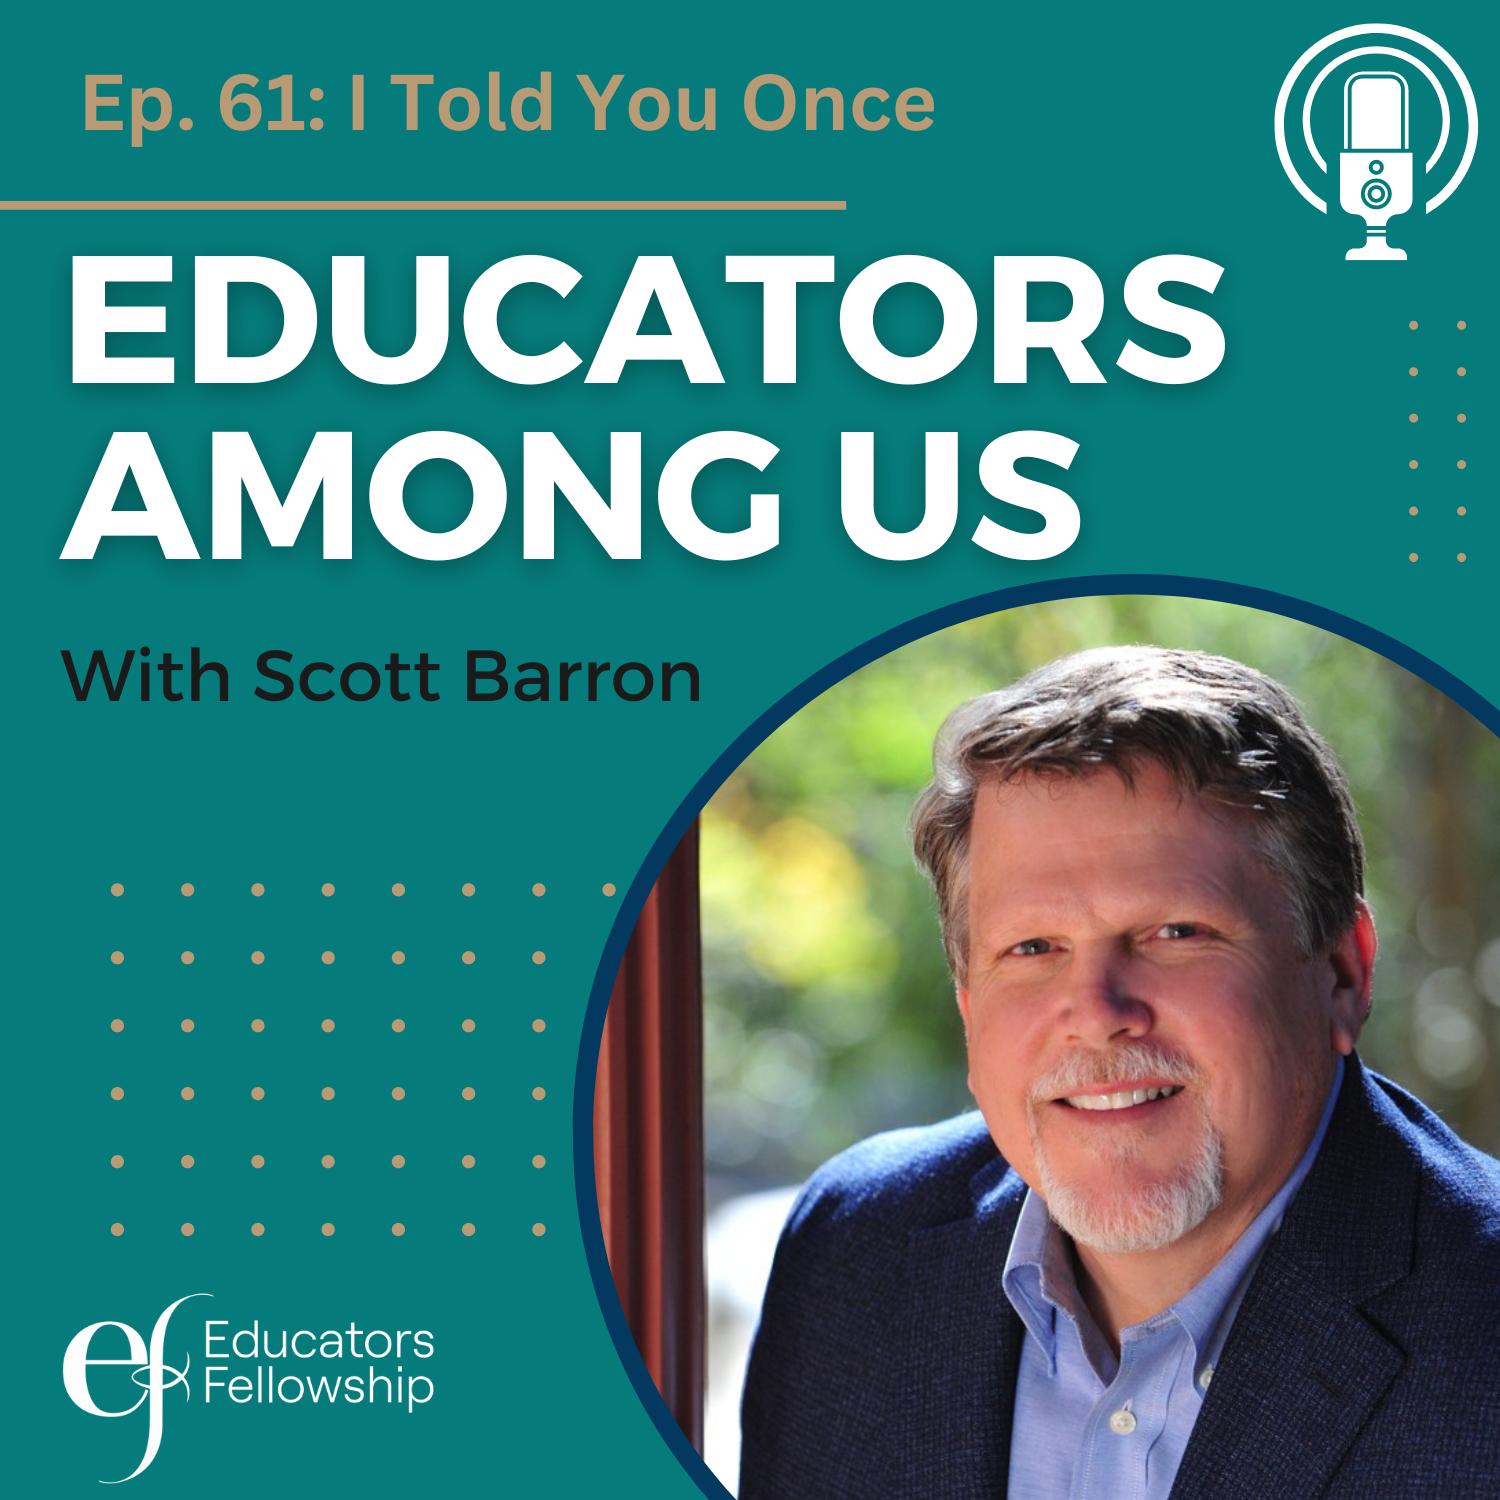 Educators Among Us Podcast I Told You Once